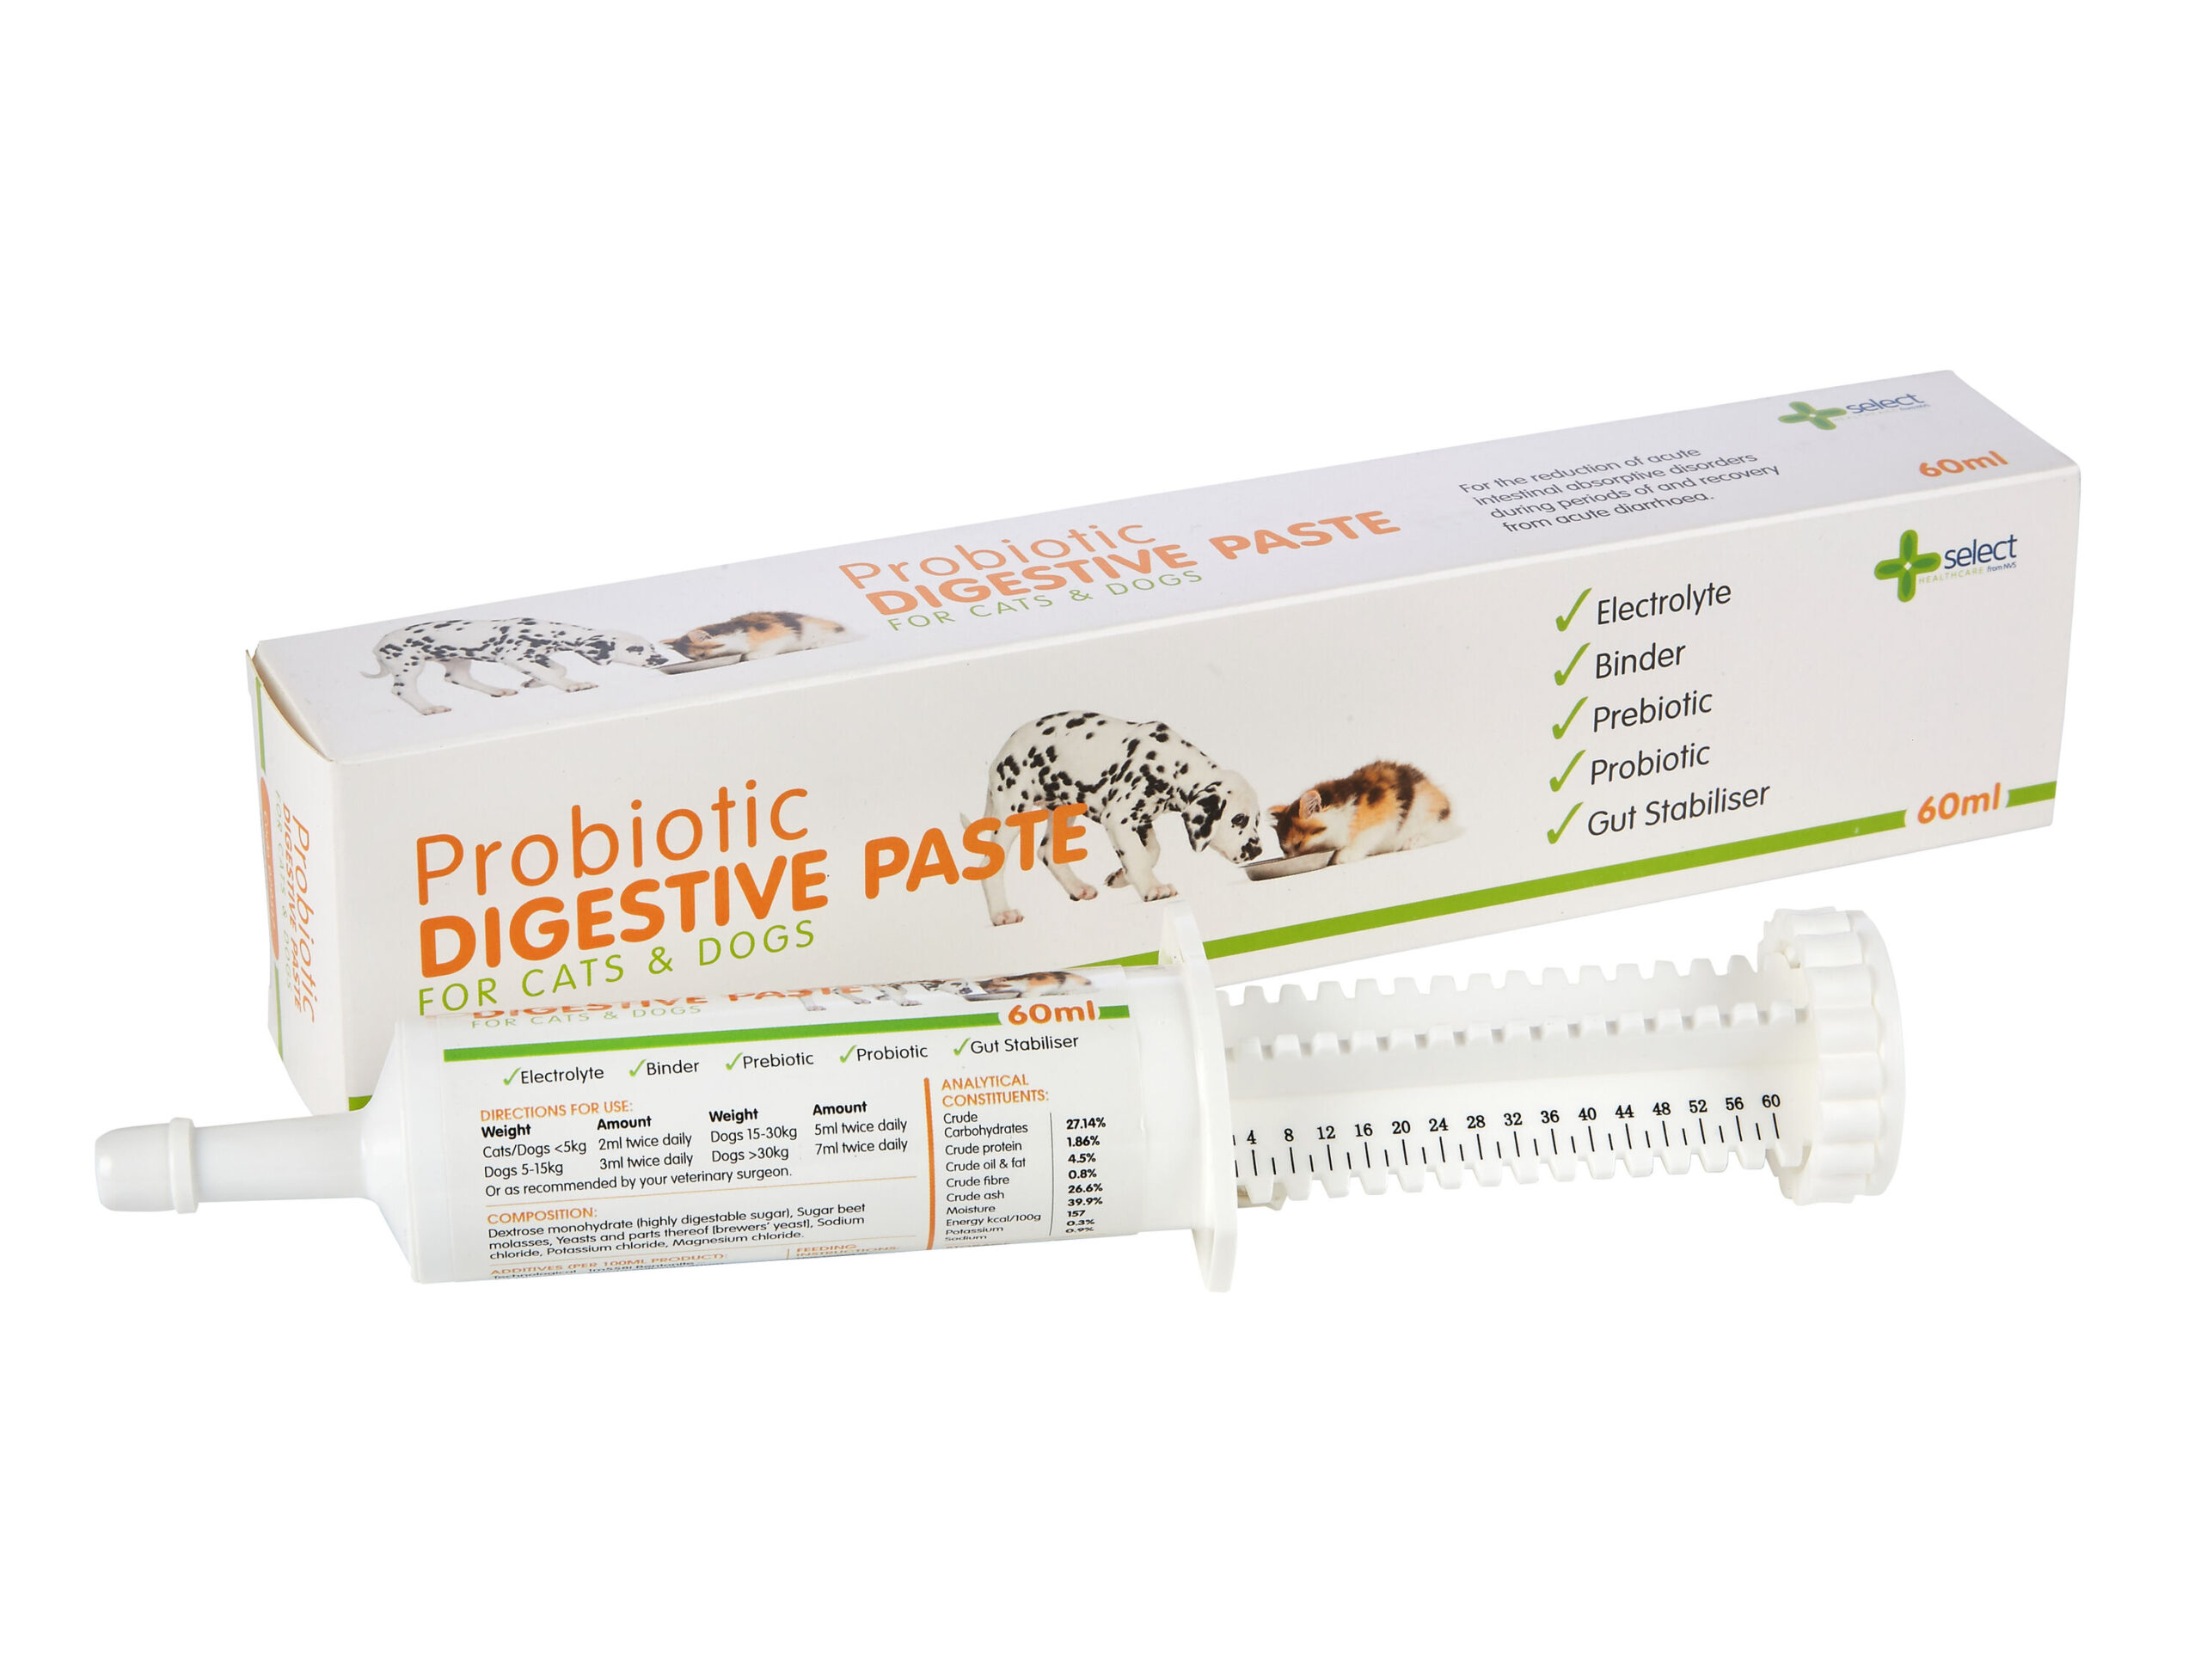 Probiotic Digestive Paste for Cats & Dogs